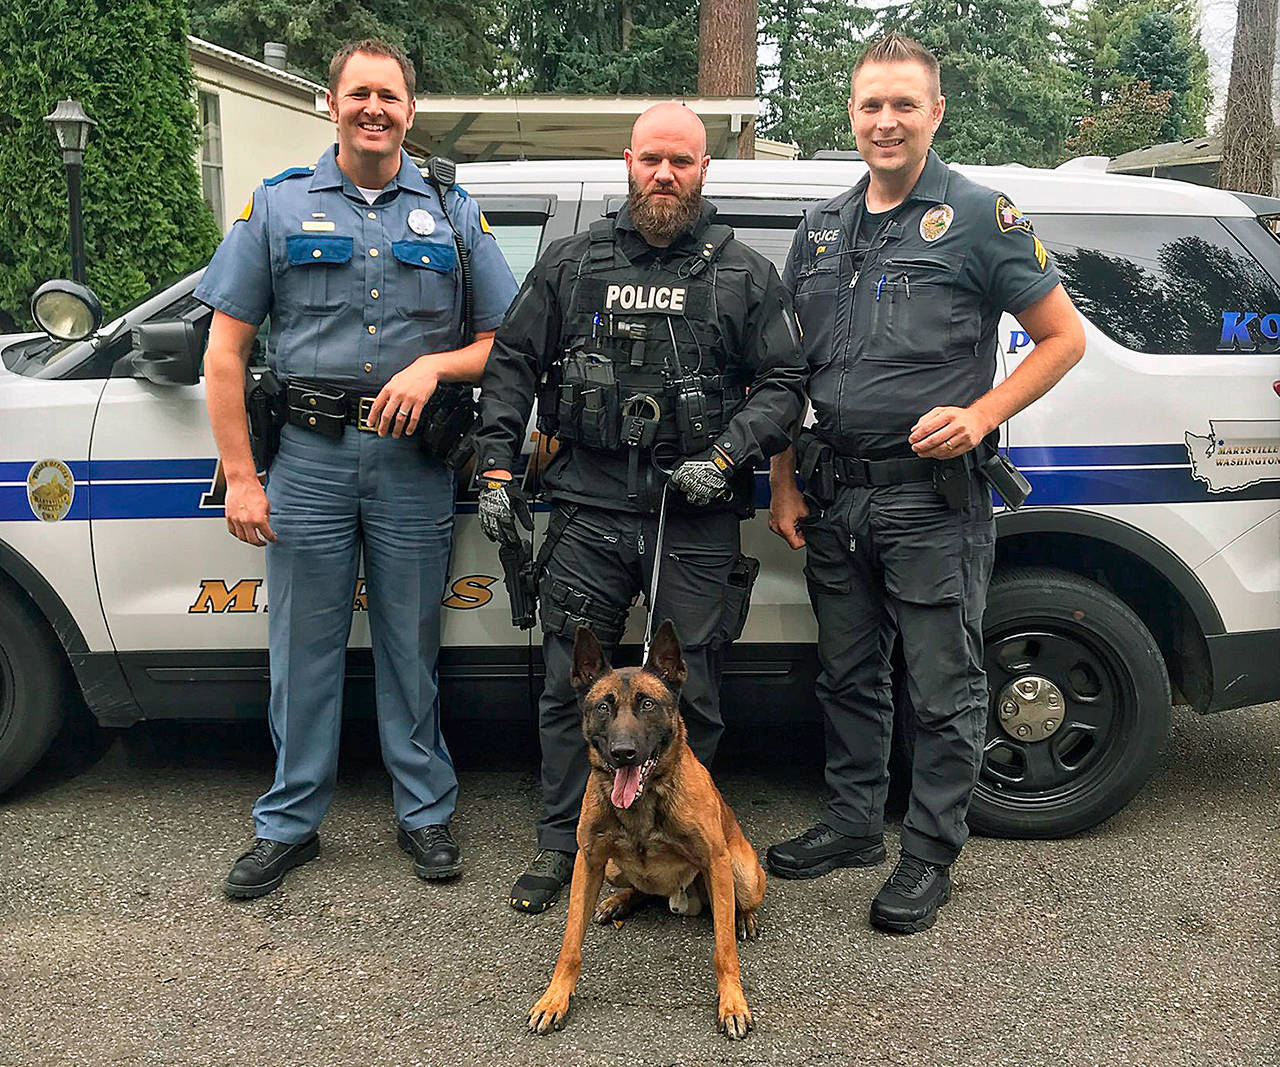 Marysville Police dog Steele found a suspect hiding under a parked car Sunday, Sept. 29, 2019 in Mobile Manor after Washington State Patrol pursued the driver on I-5. (Marysville Police Department)